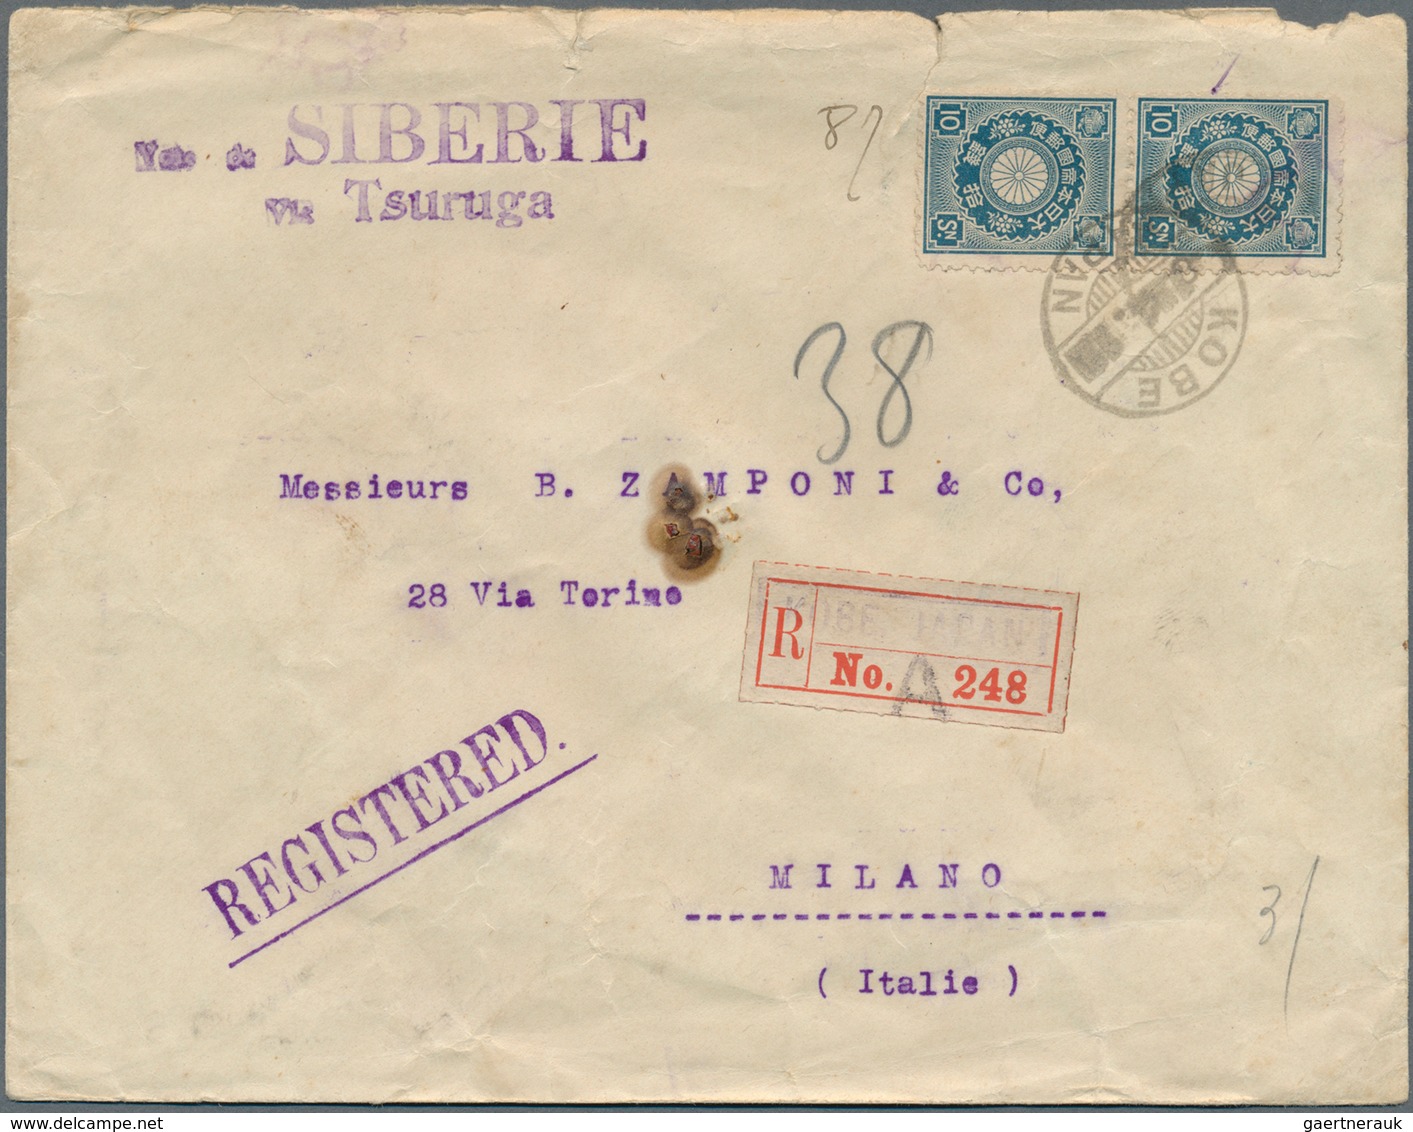 29460 Japan: 1876/1914, covers (11 inc. registered x4) mostly to Italy inc. from "Institute for infectiono